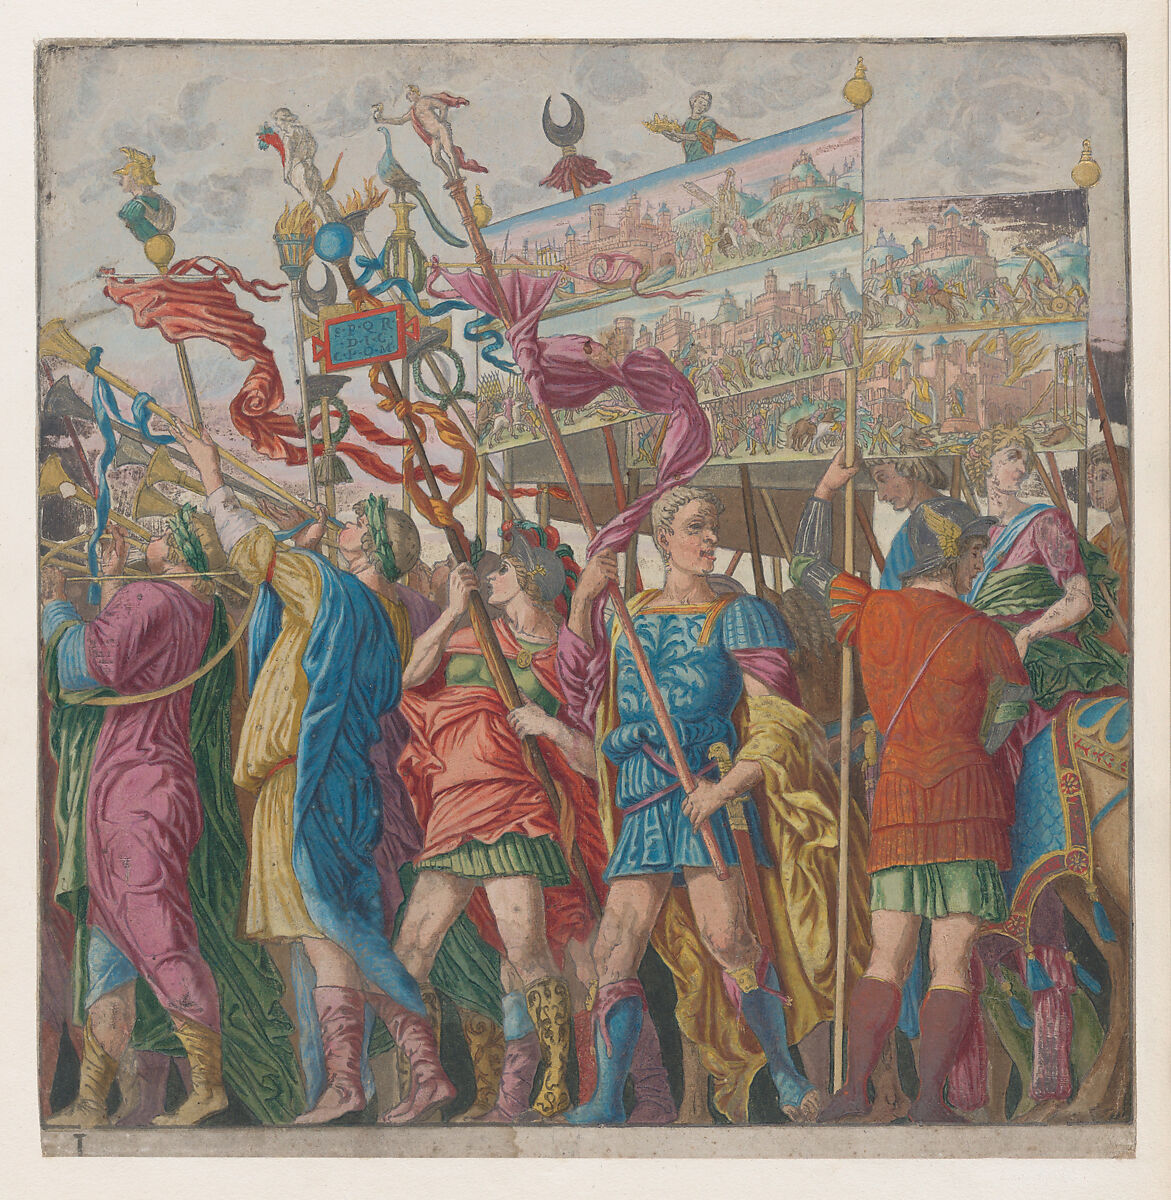 Sheet 1: Soldiers carrying banners depicting Julius Caesar's triumphant military exploits, from "The Triumph of Julius Caesar", Andrea Andreani (Italian, Mantua 1558/1559–1629), Hand-colored woodcut 